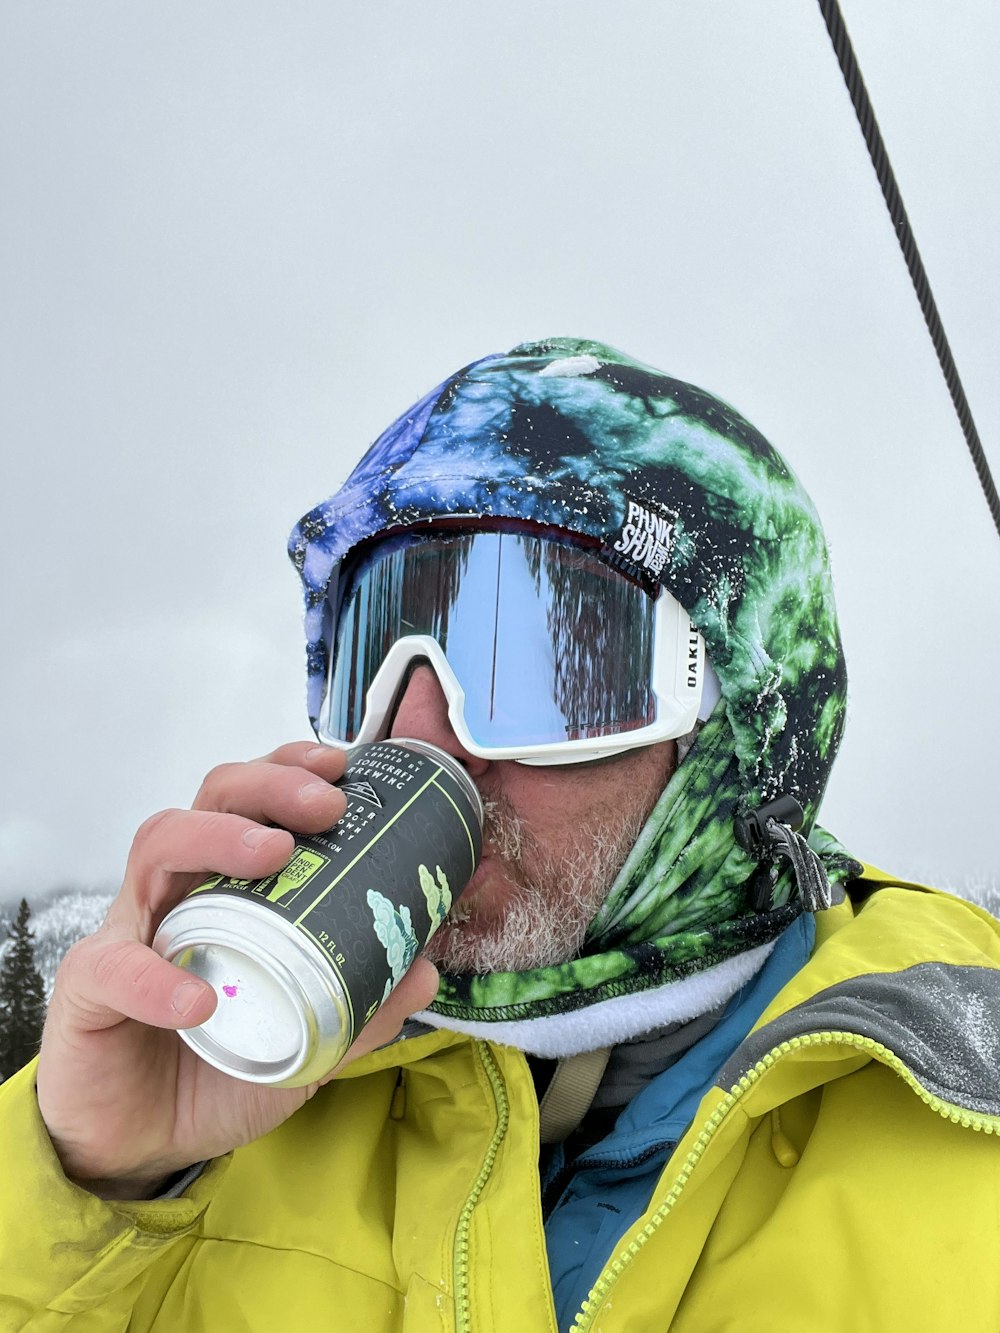 a person wearing a helmet and goggles drinking from a can